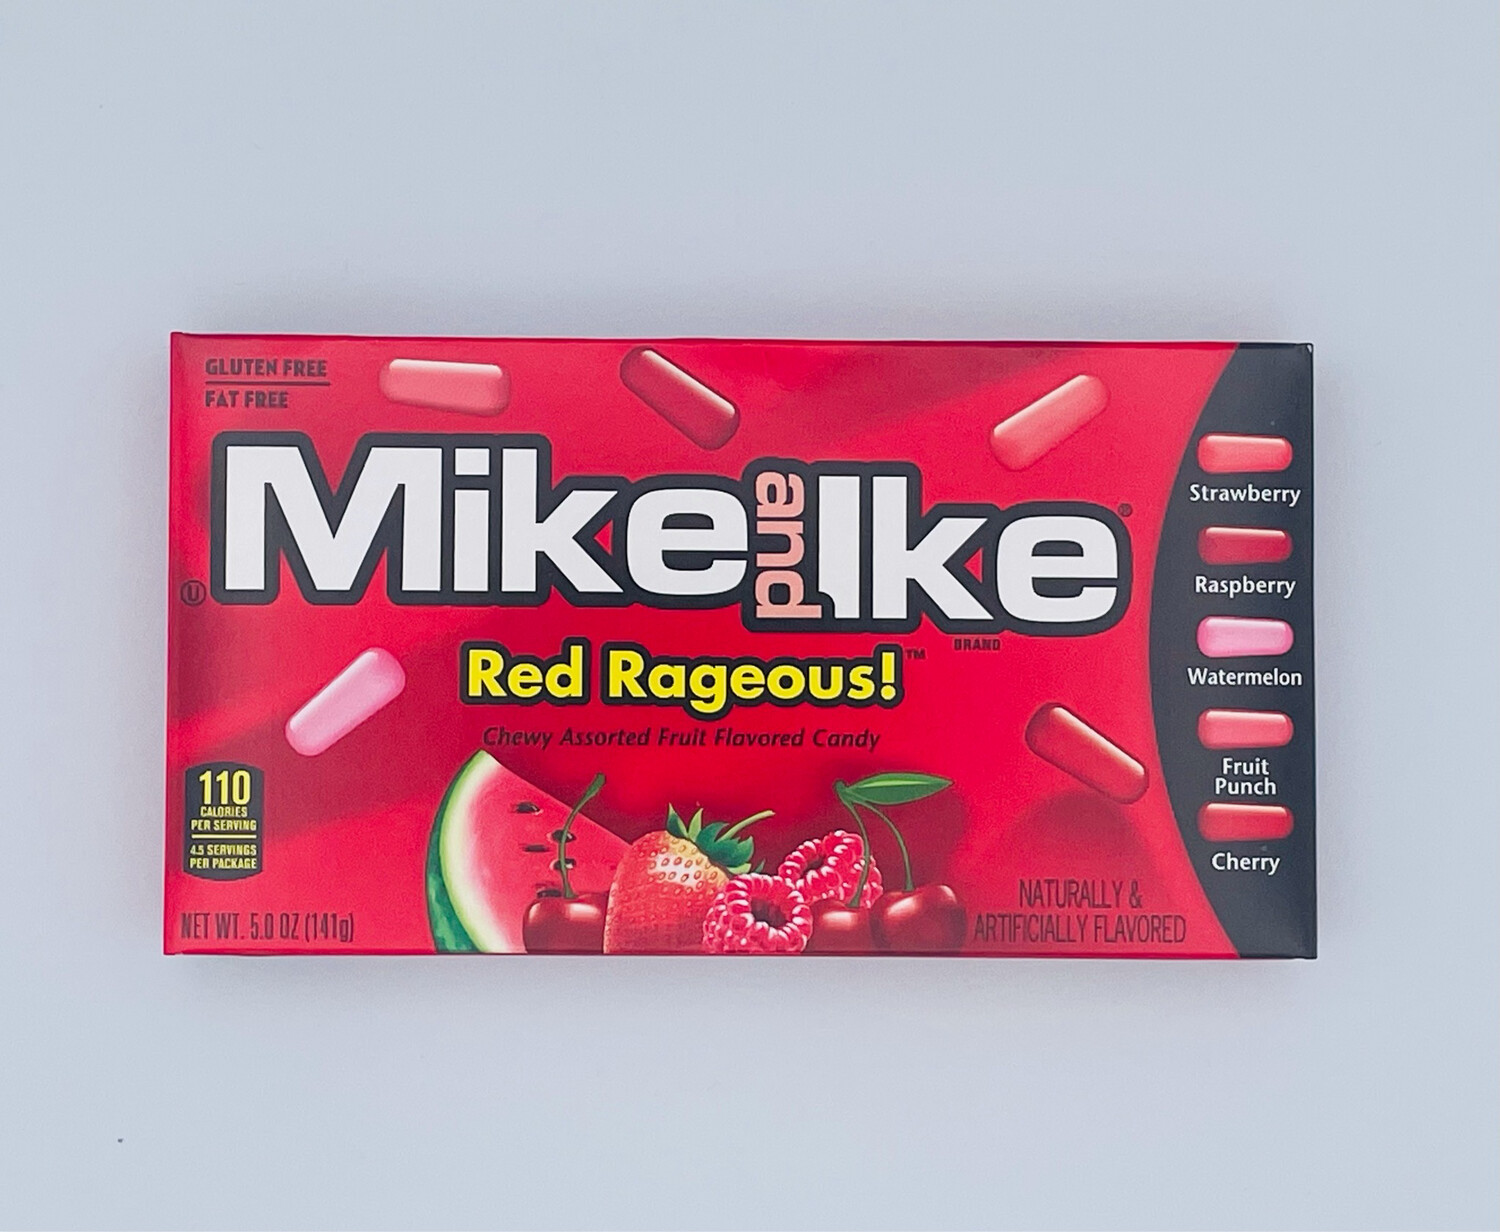 Mike and Ike Red Rageous!